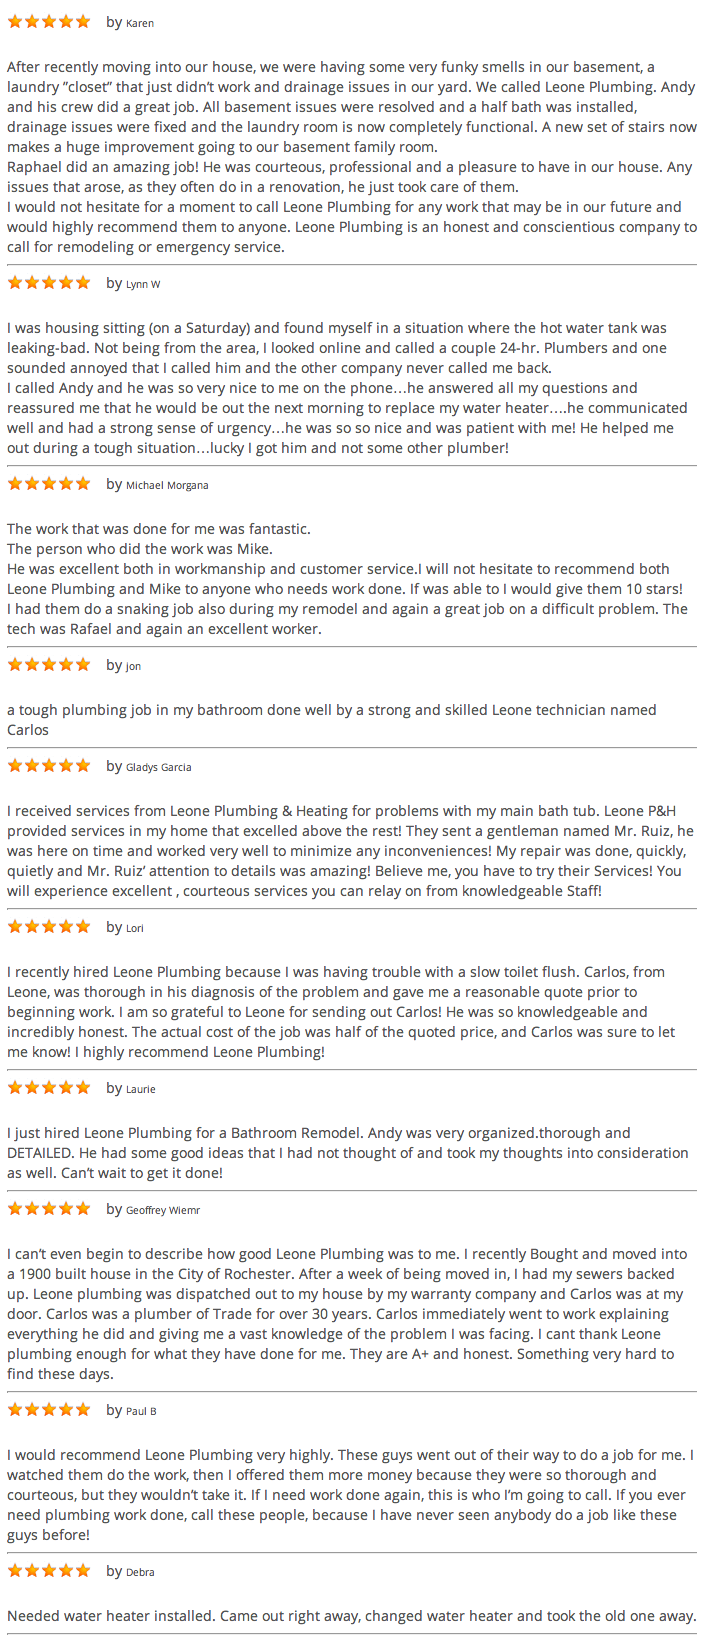 Top Rated Plumber in Rochester  NY    Honest Testimonials From Satisfied Customers